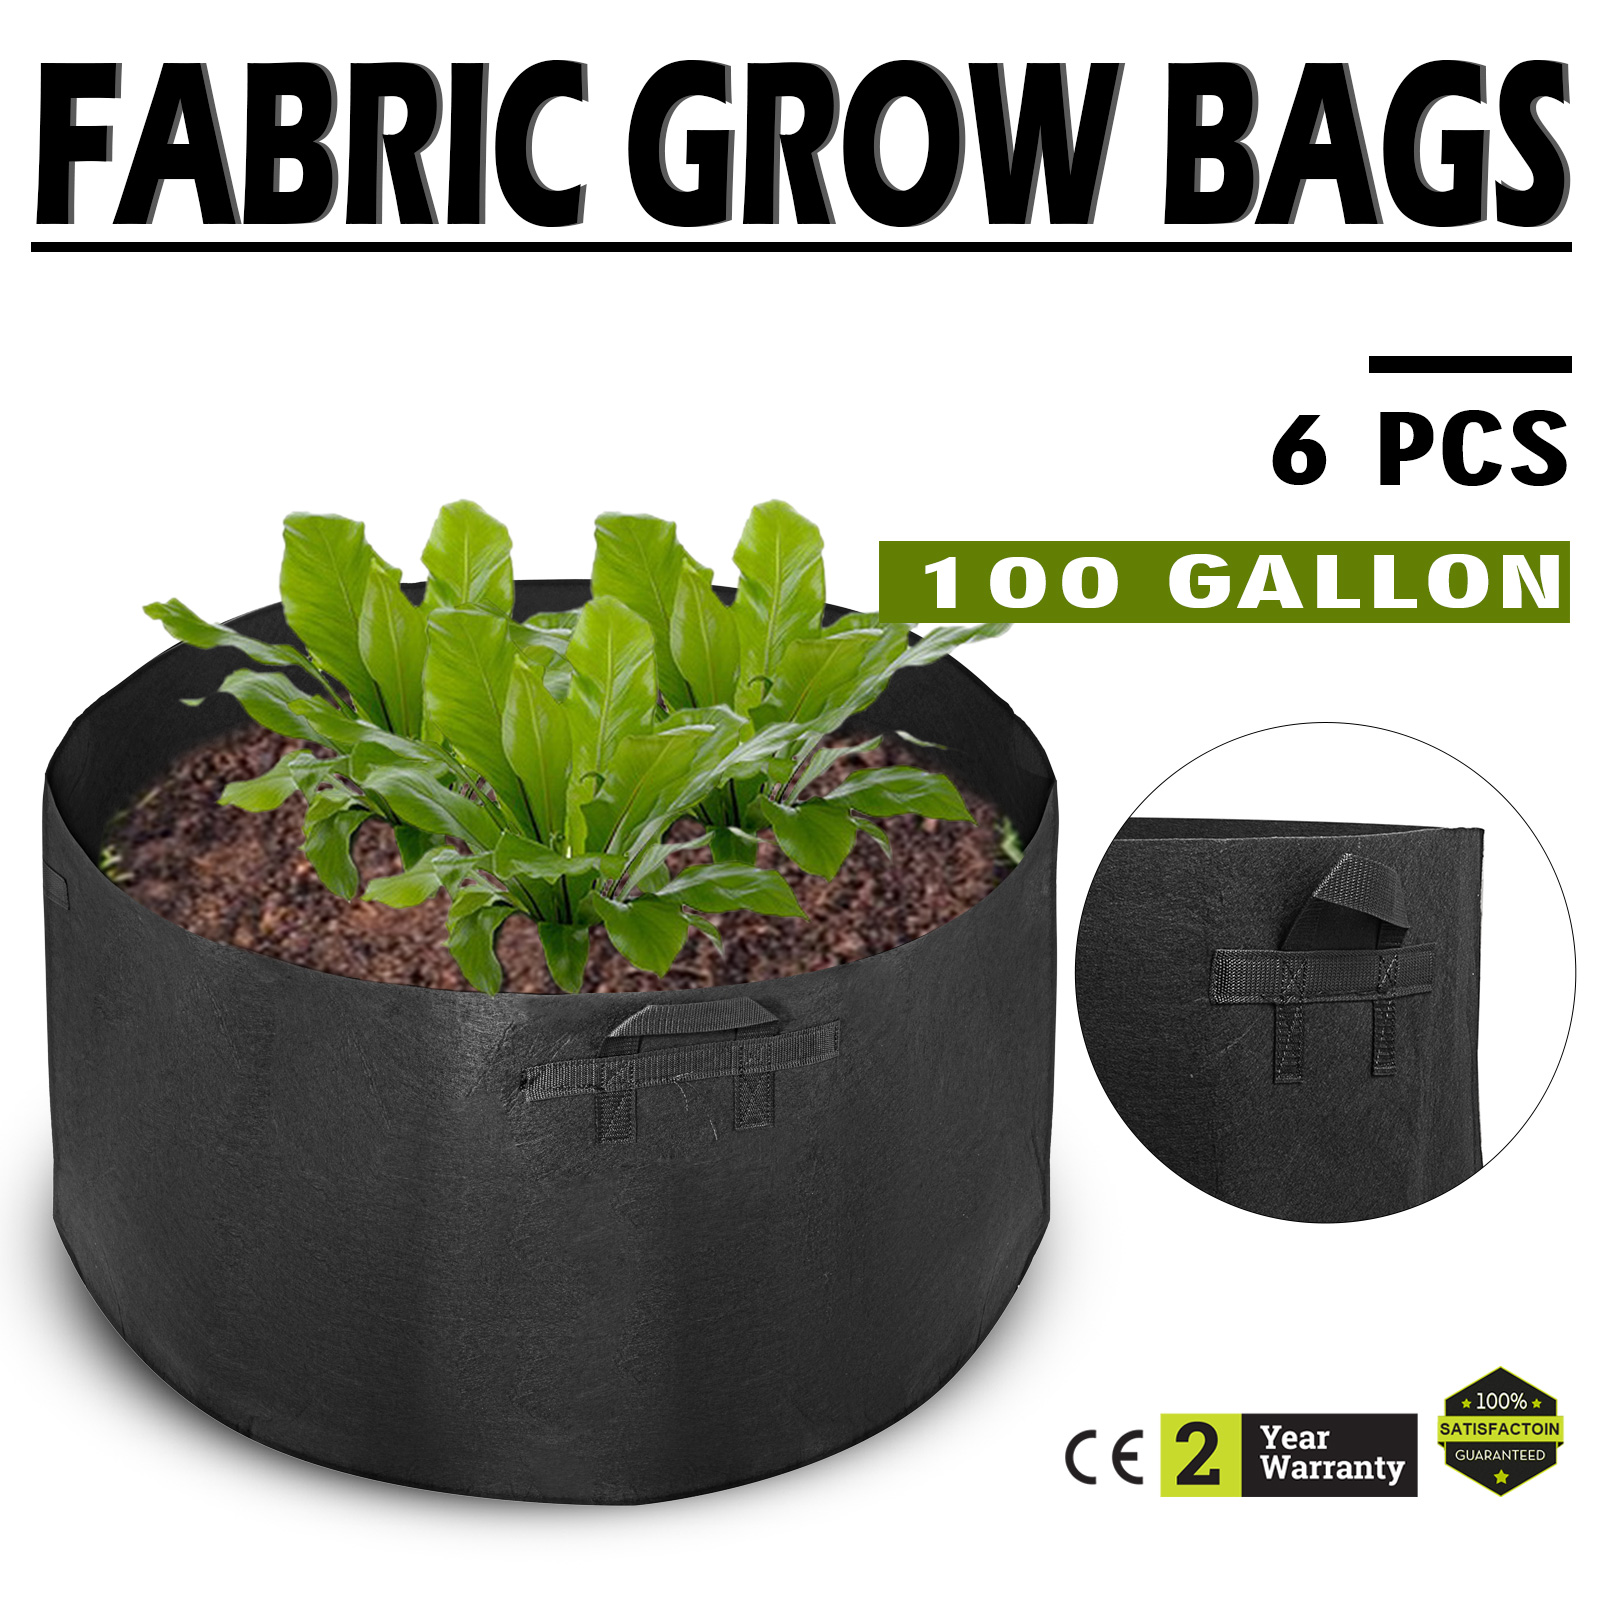 1 Gallon 6pcs/Pack Black Fabric Grow Pots Bags for Hydroponic Plant Growing 